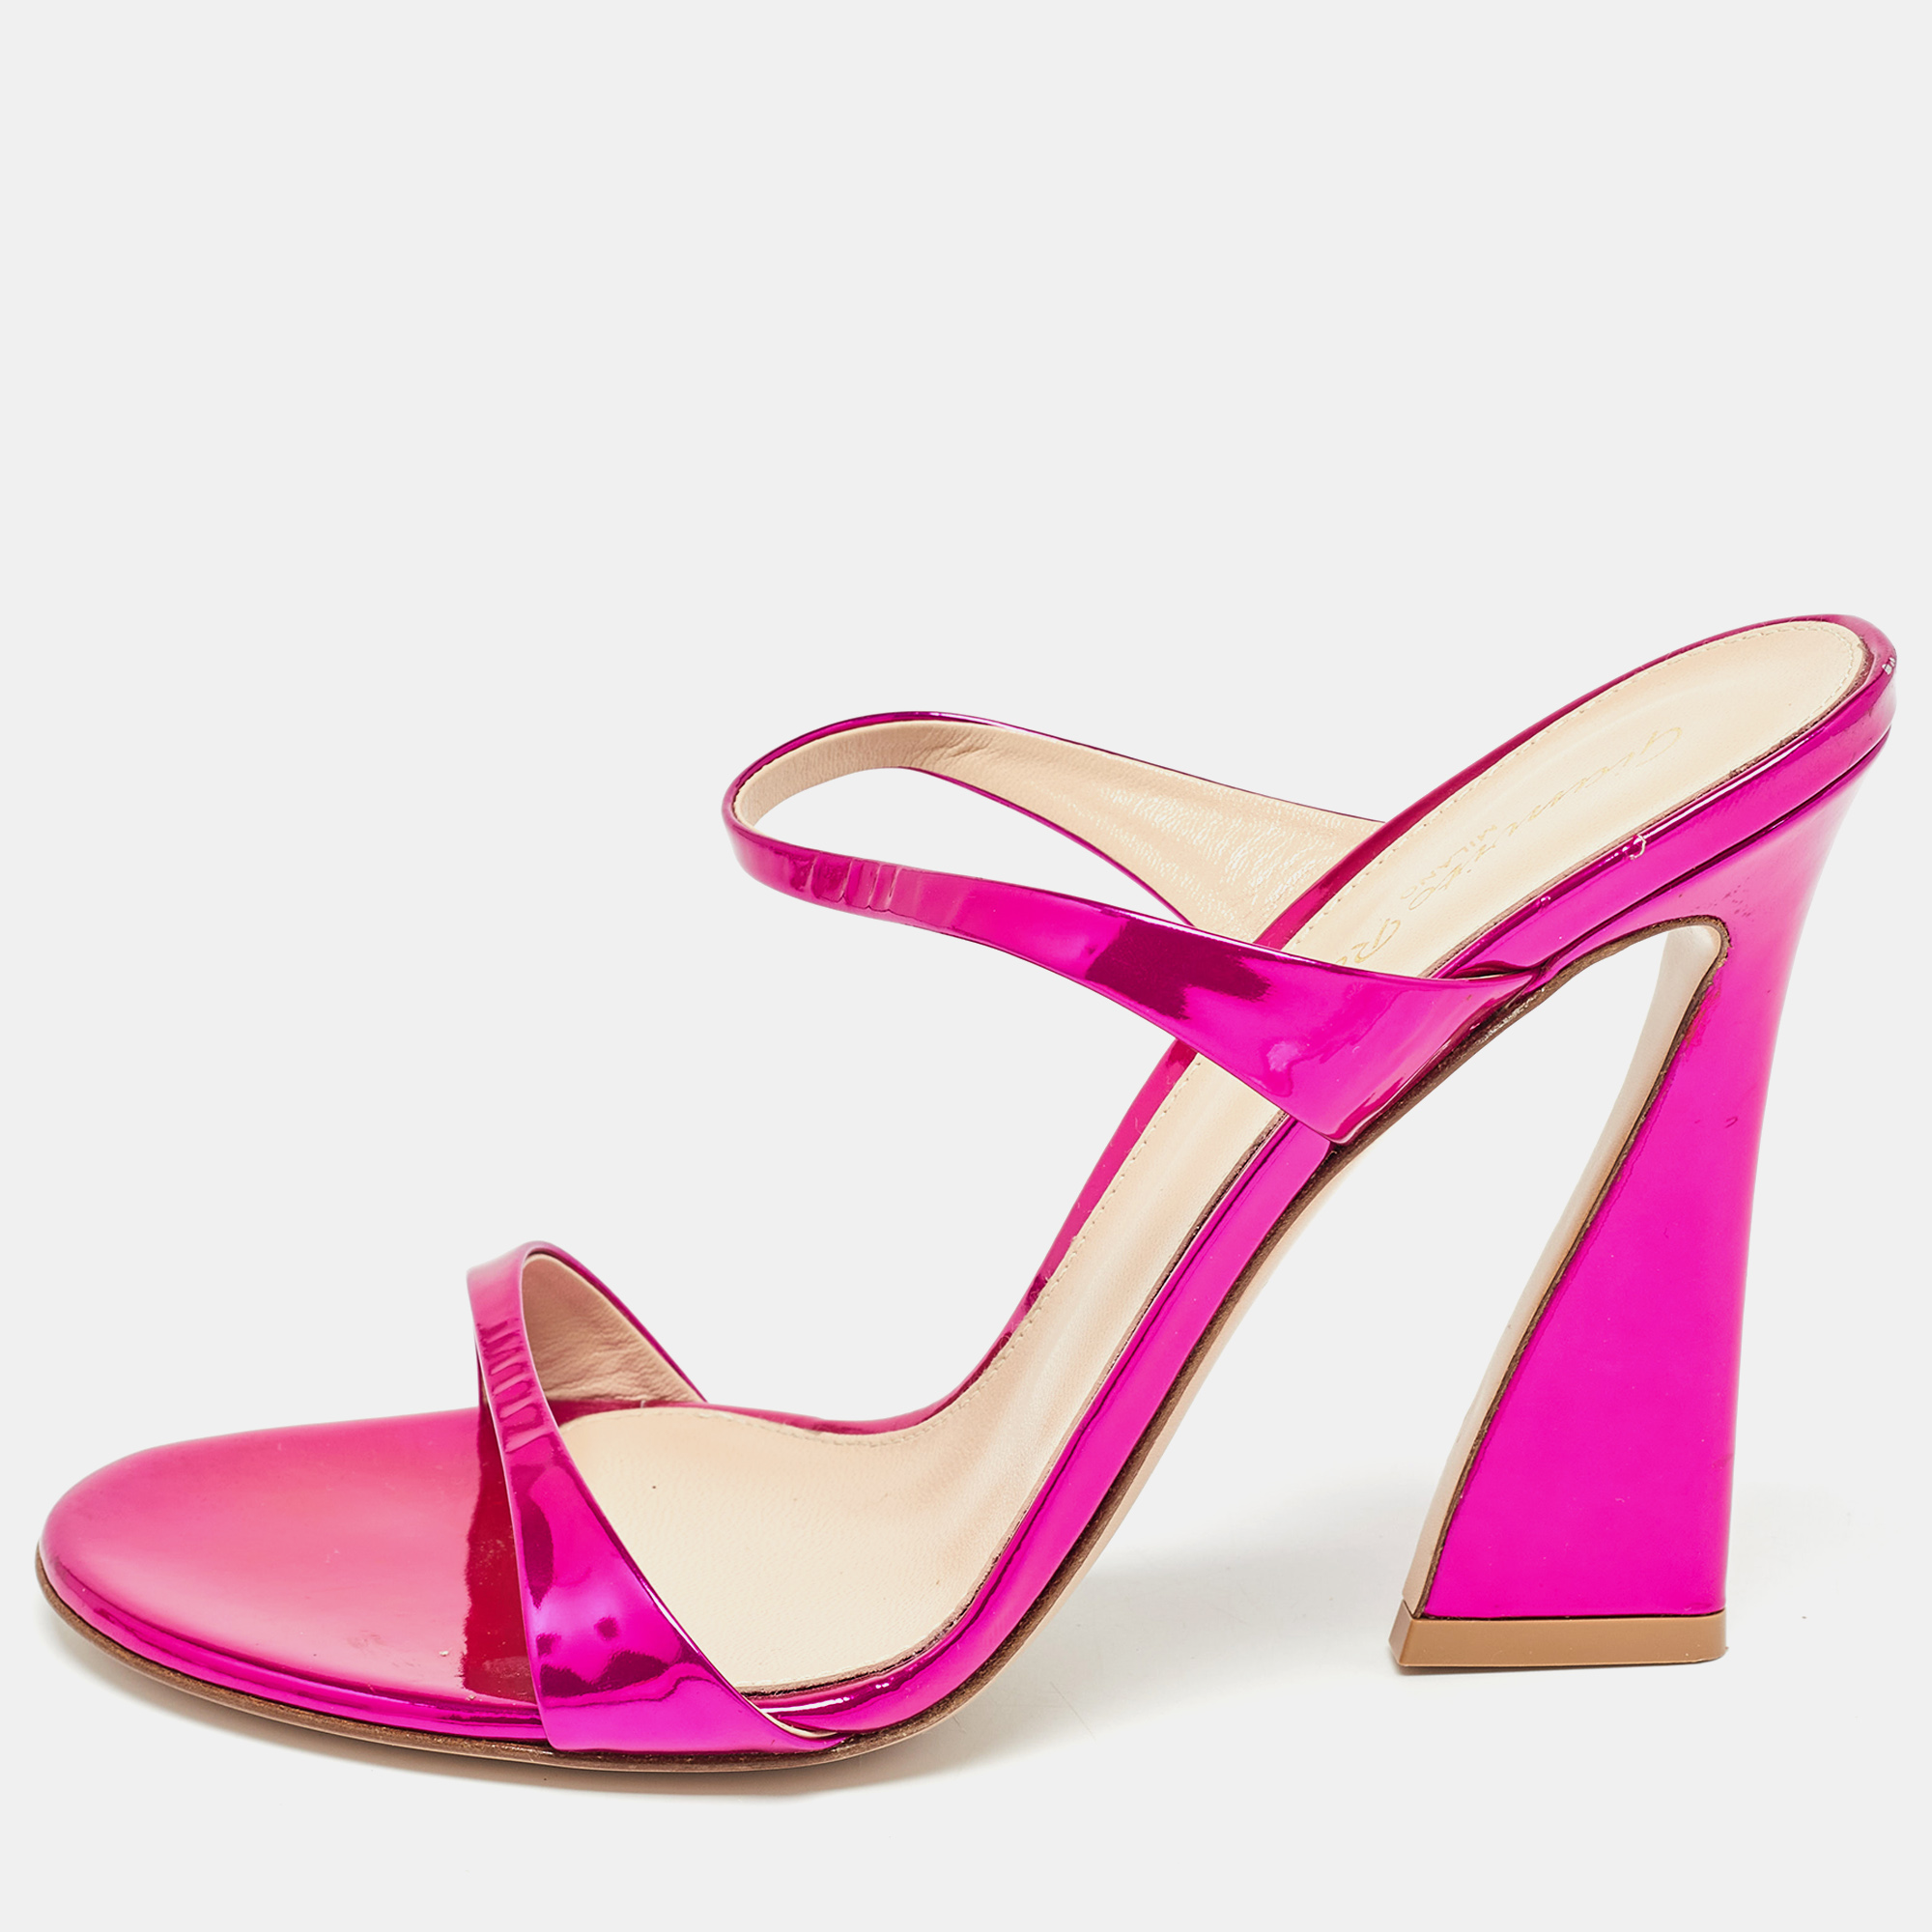 

Gianvito Rossi Metallic Pink Leather Double Strap Slide Sandals Size